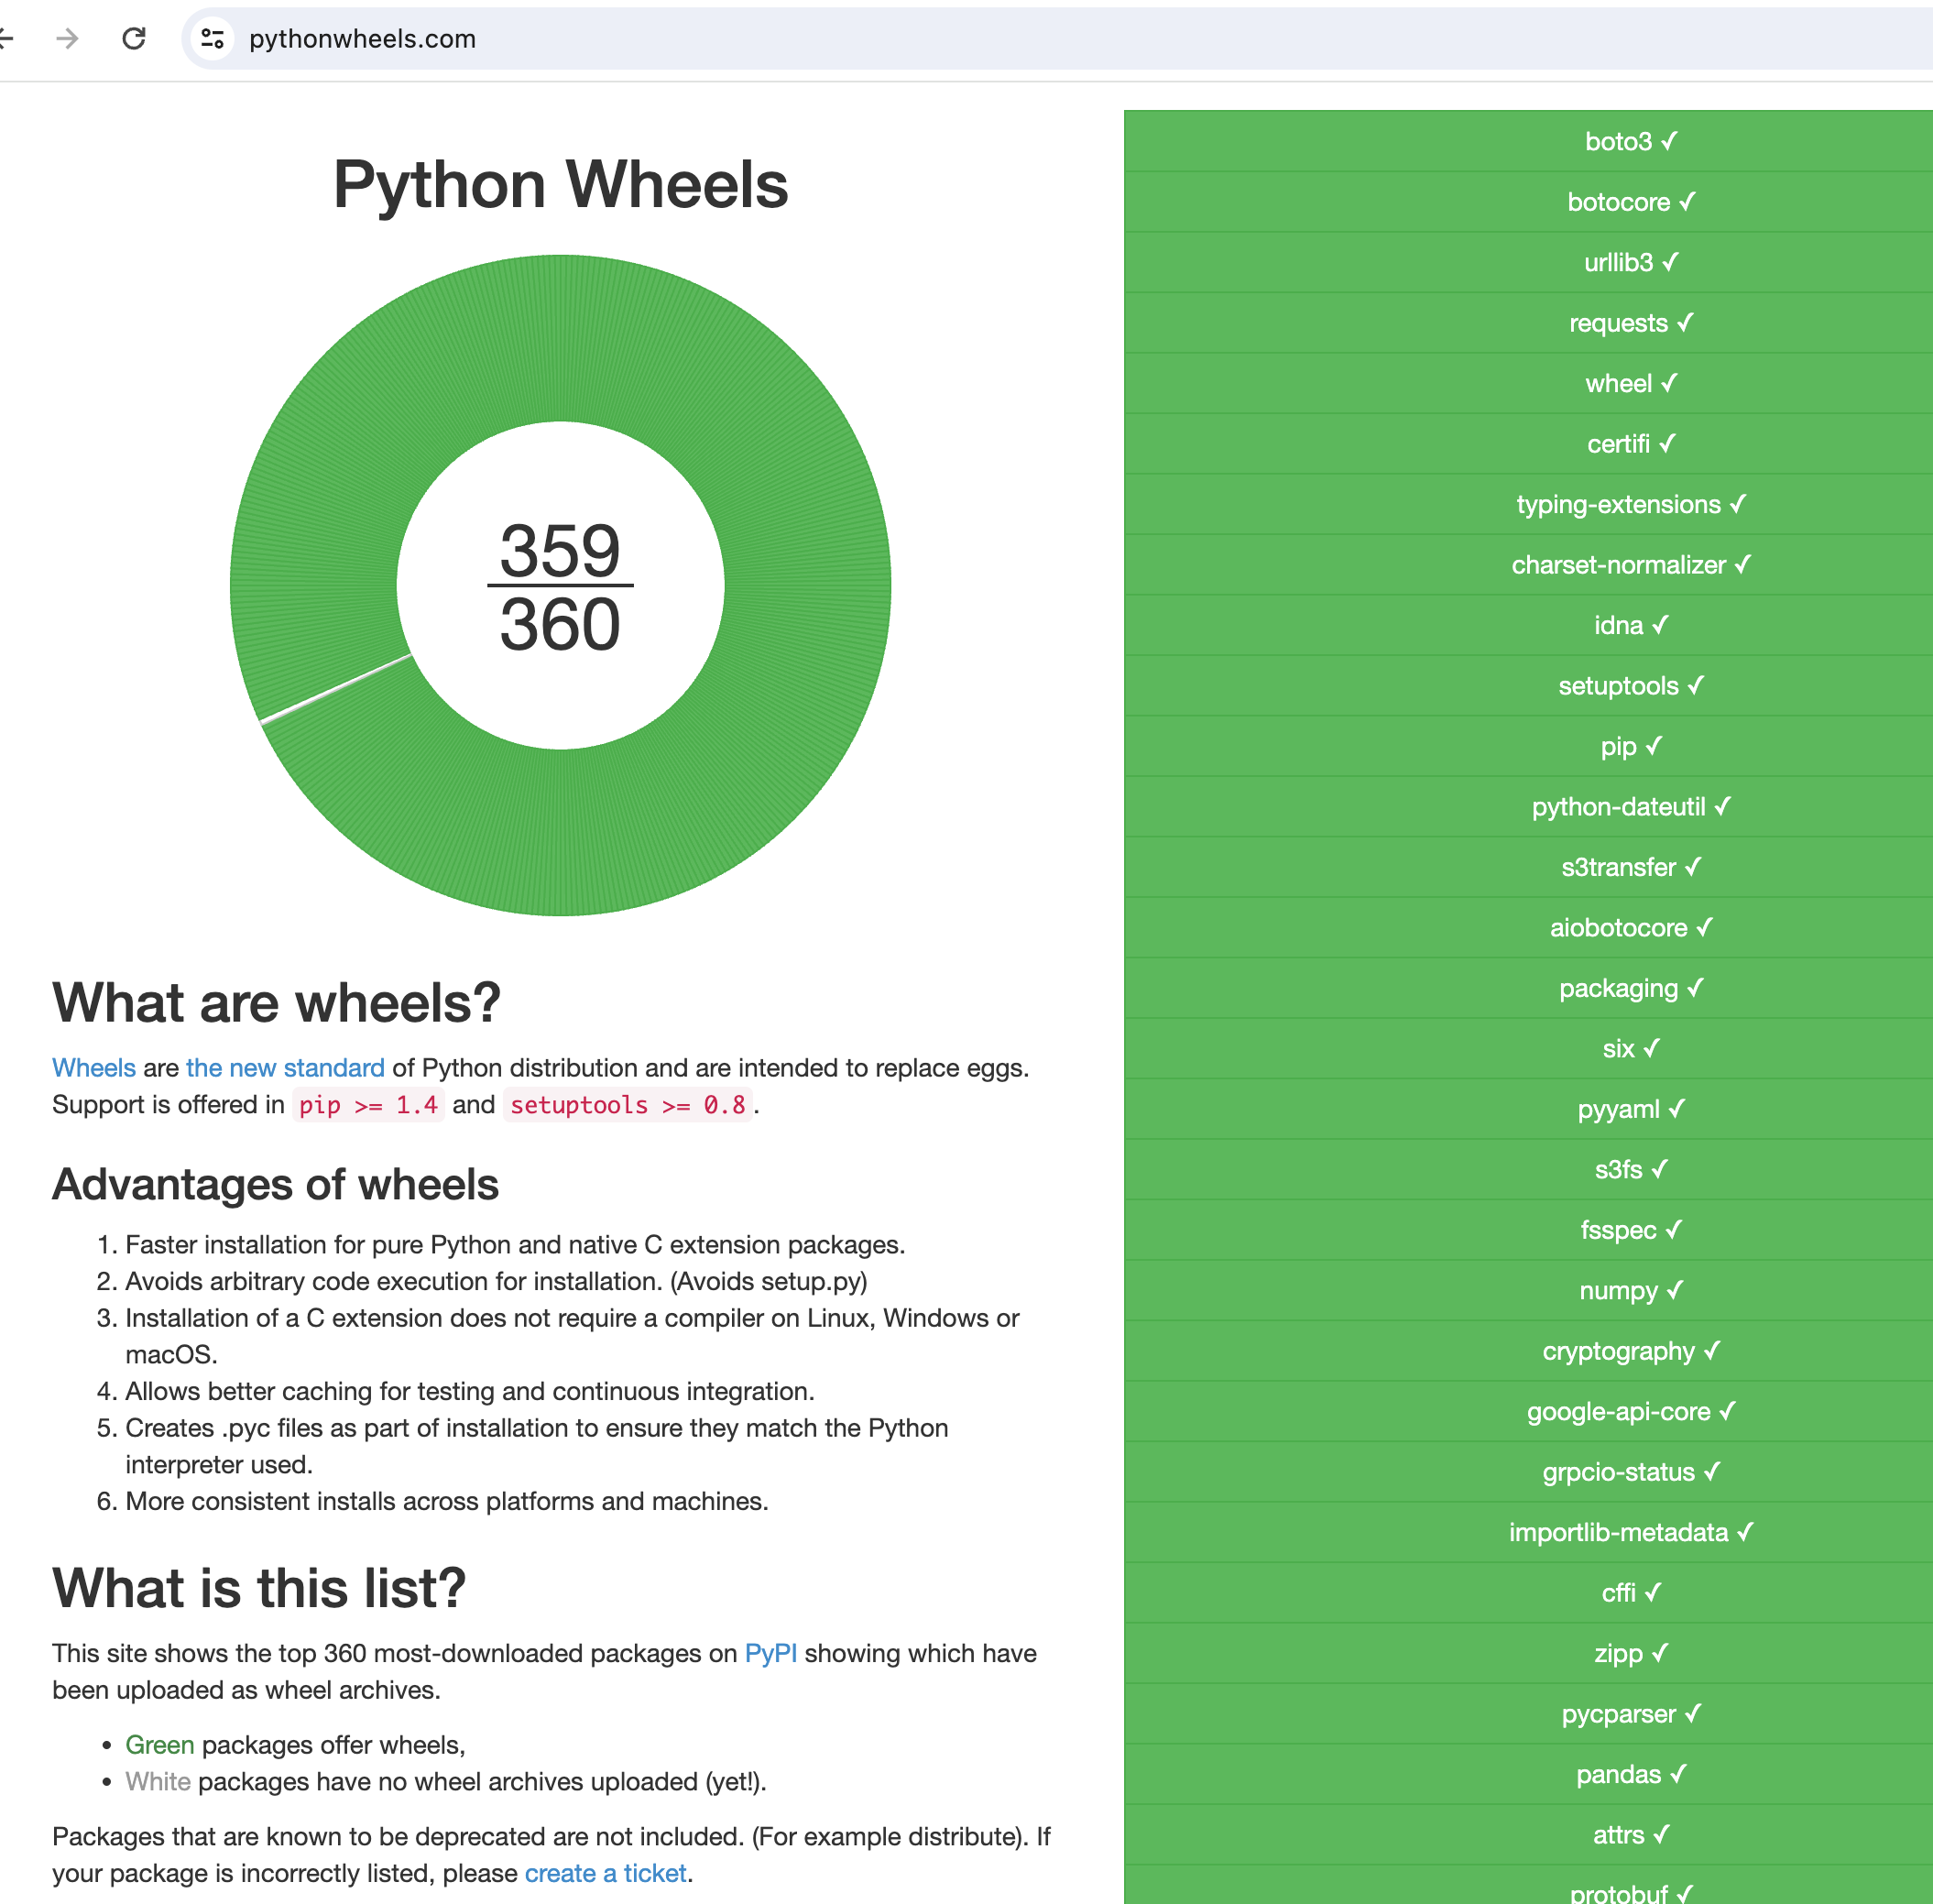 The pythonwheels.com website shows that all but one of the top packages is offered with wheels.